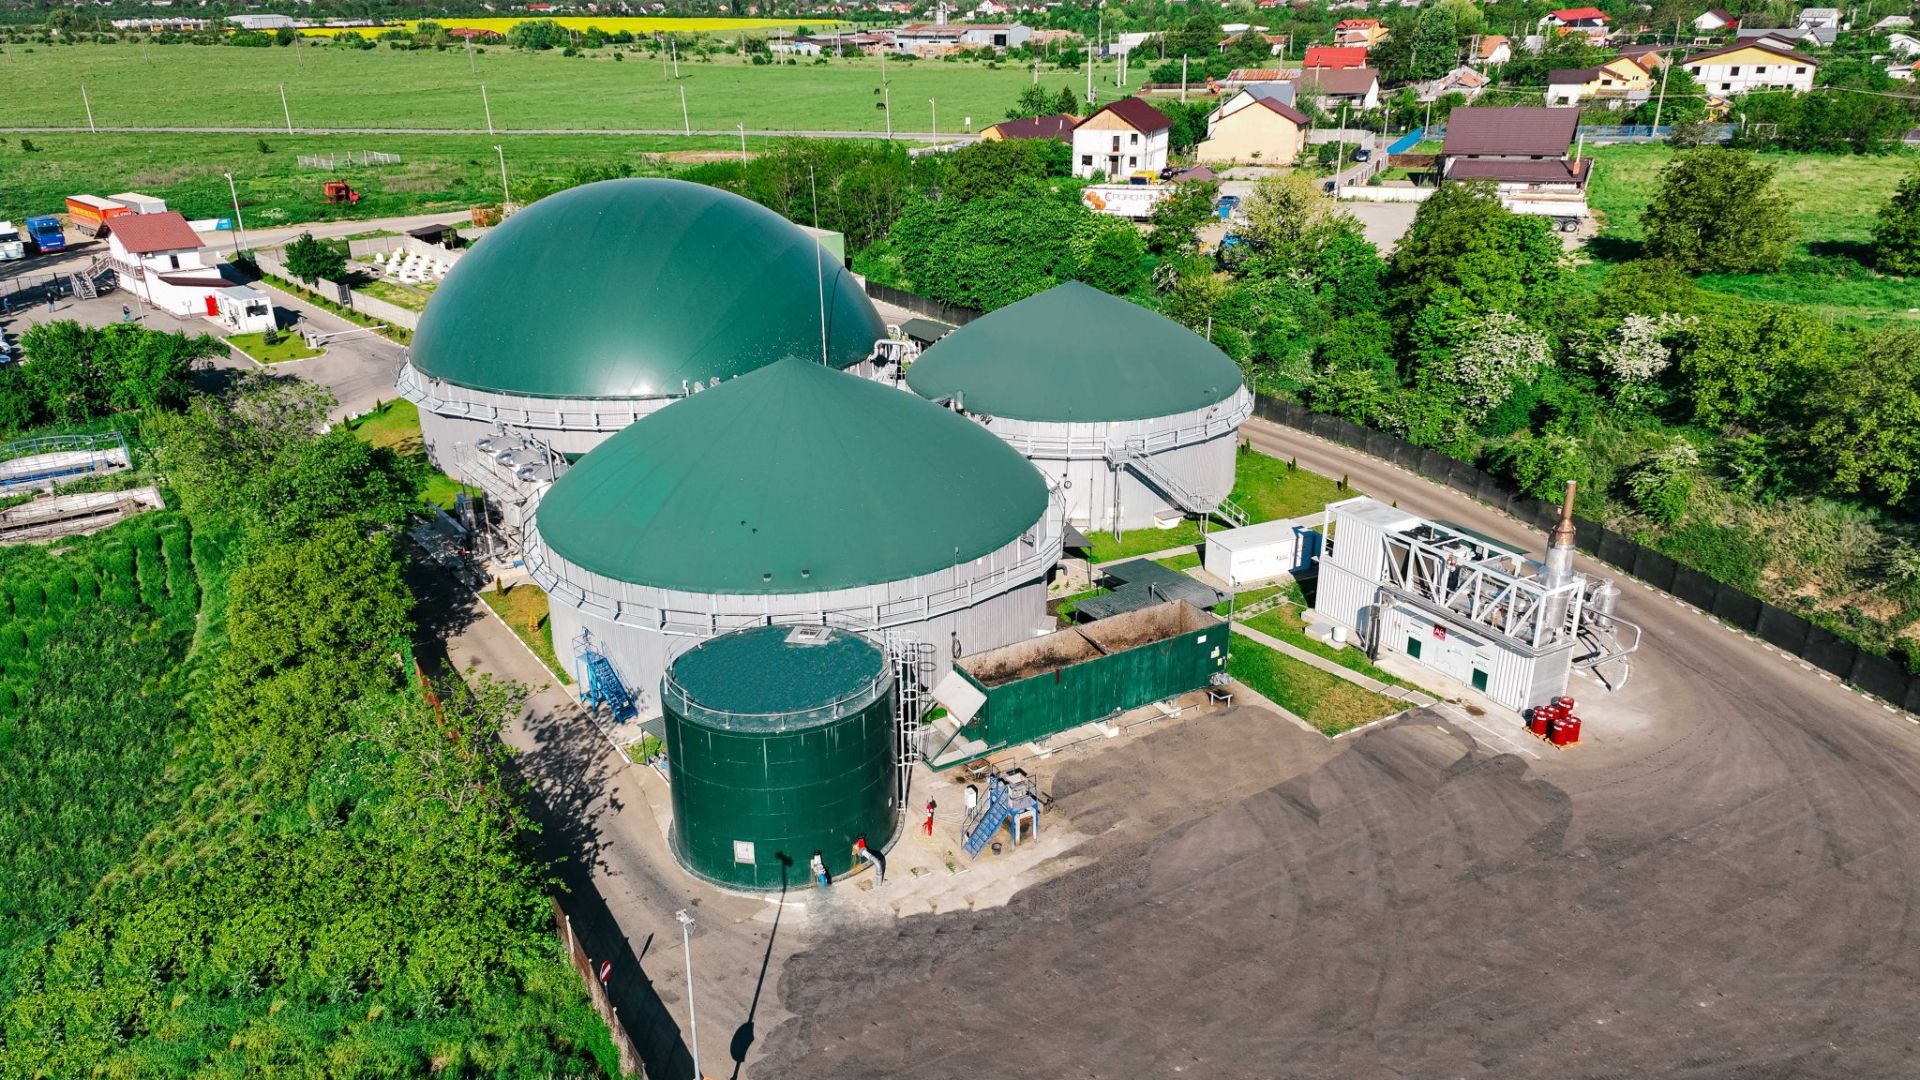 Genesis Biopartner, the Romanian market leader in green energy production from biogas